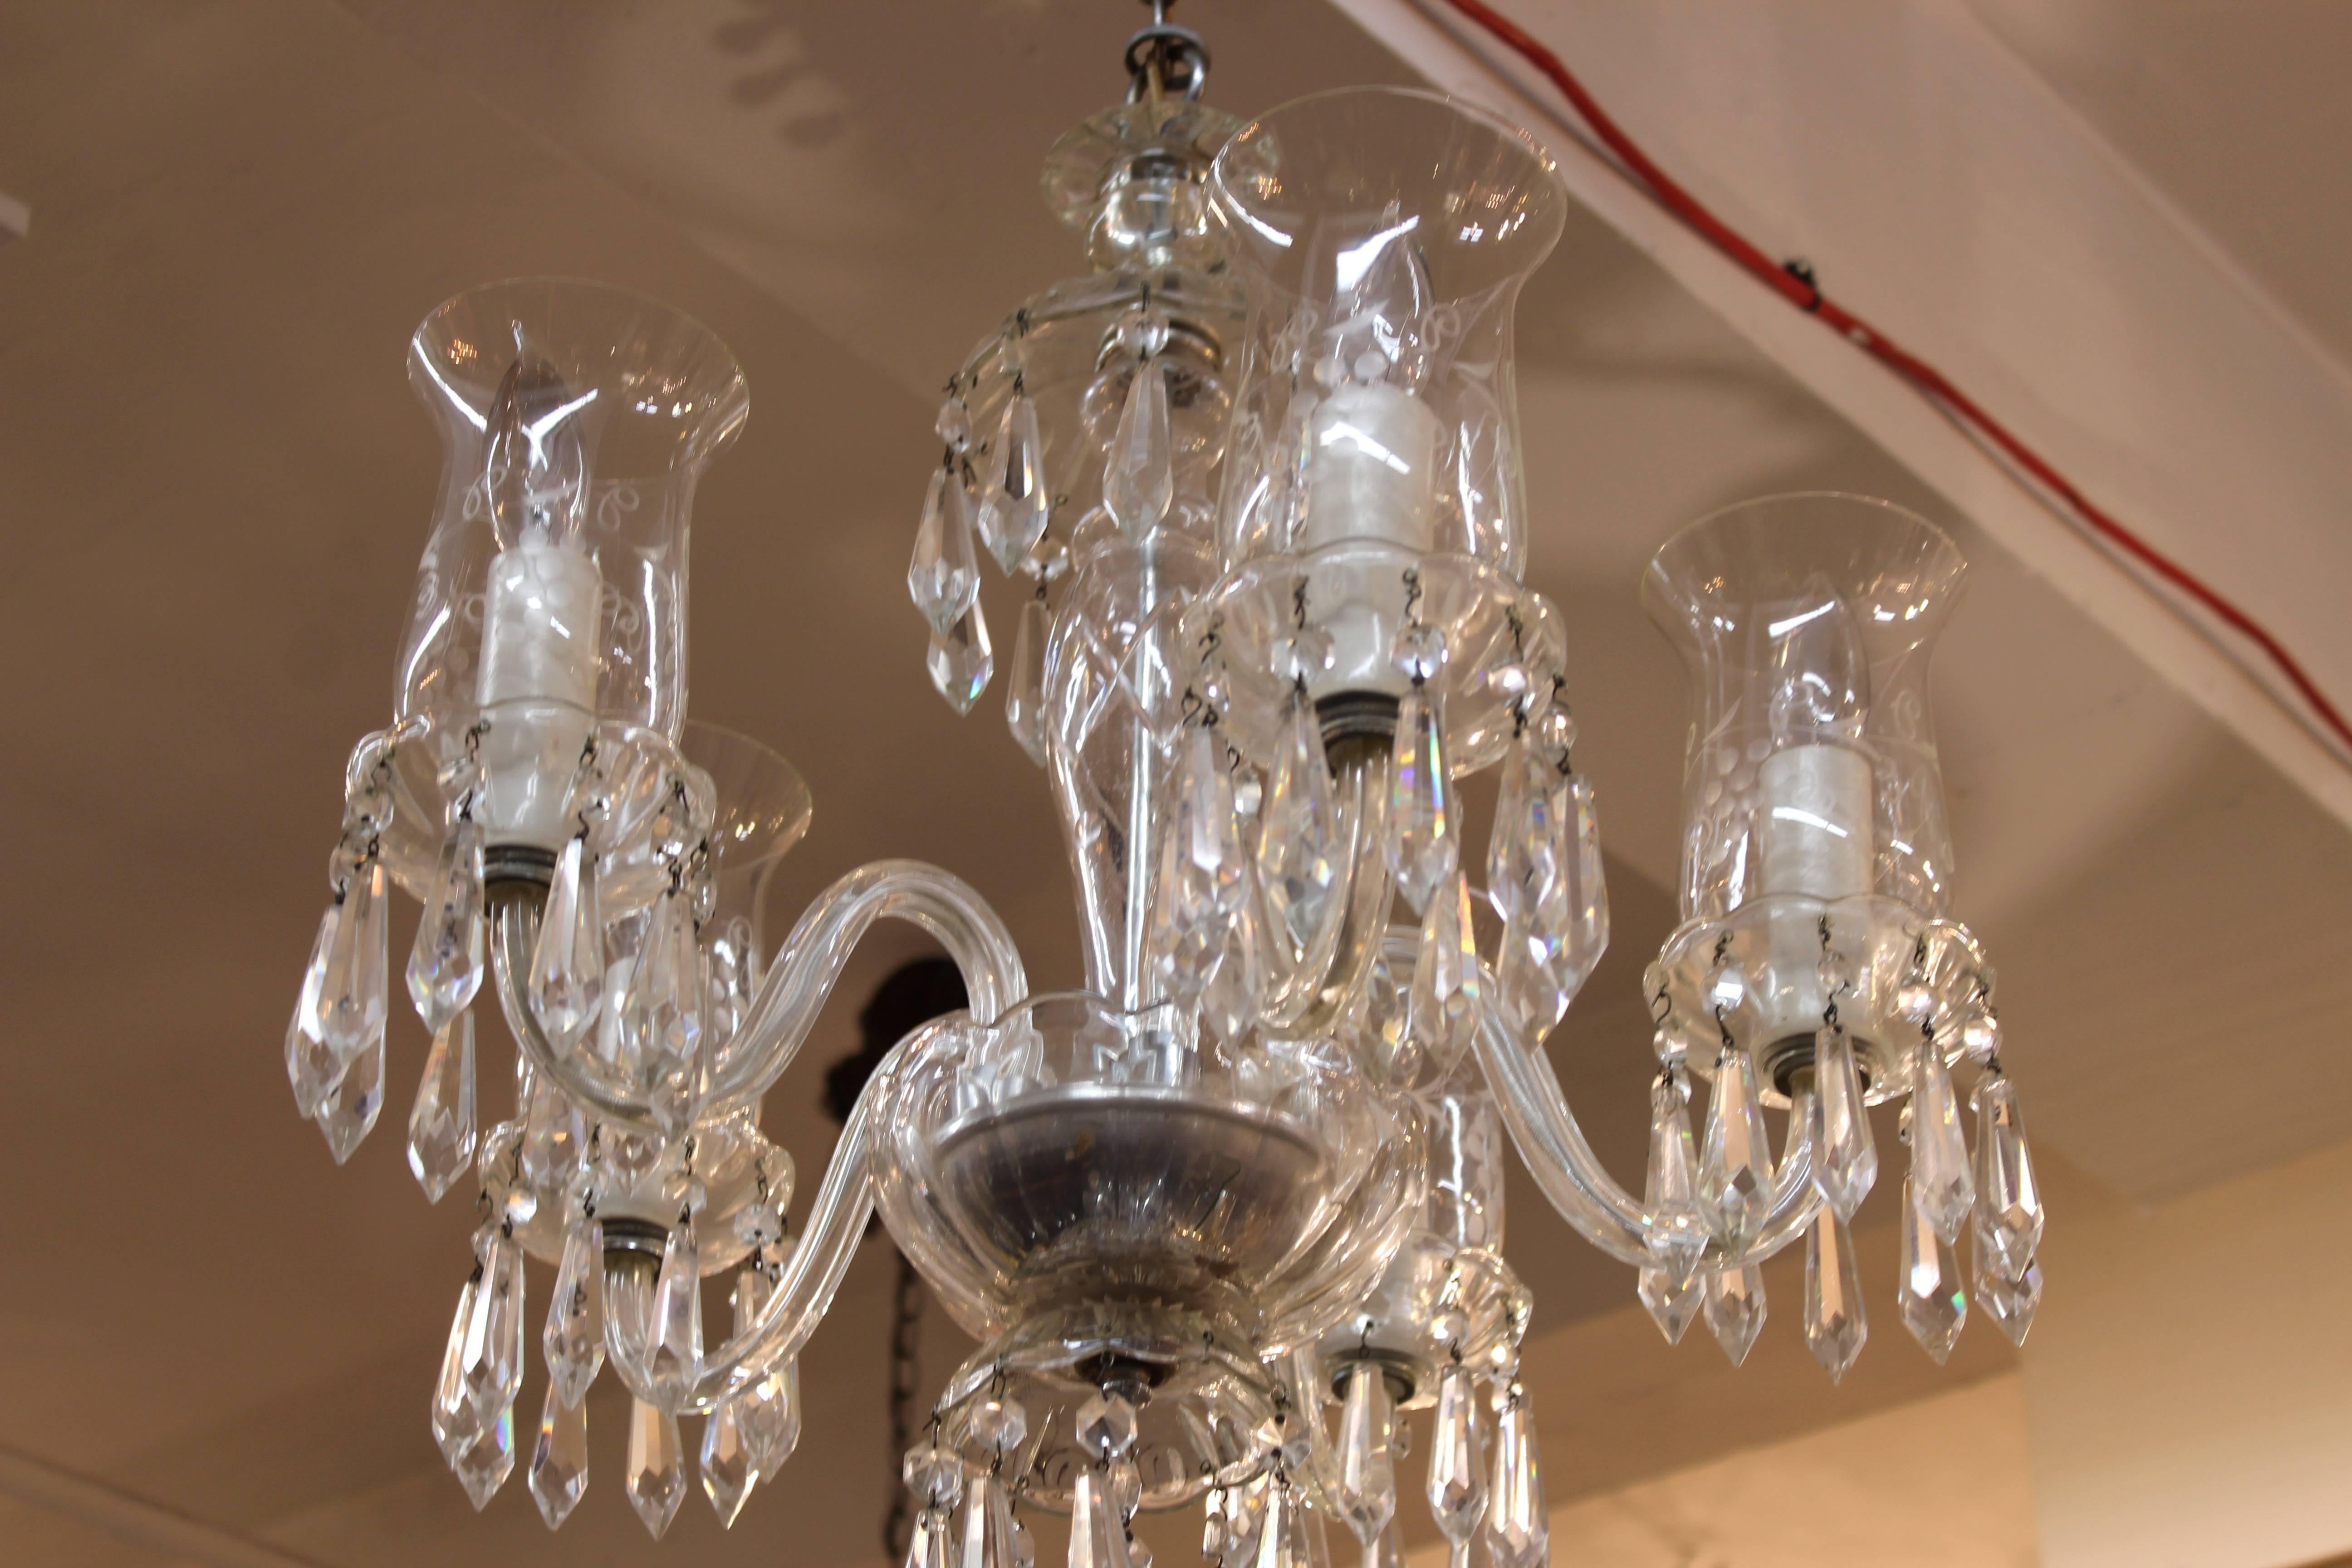 A midcentury Irish chandelier in glass and Lucite, manufactured in the 1940s in Ireland. The piece is in good condition, with one of the drops missing from the centre.